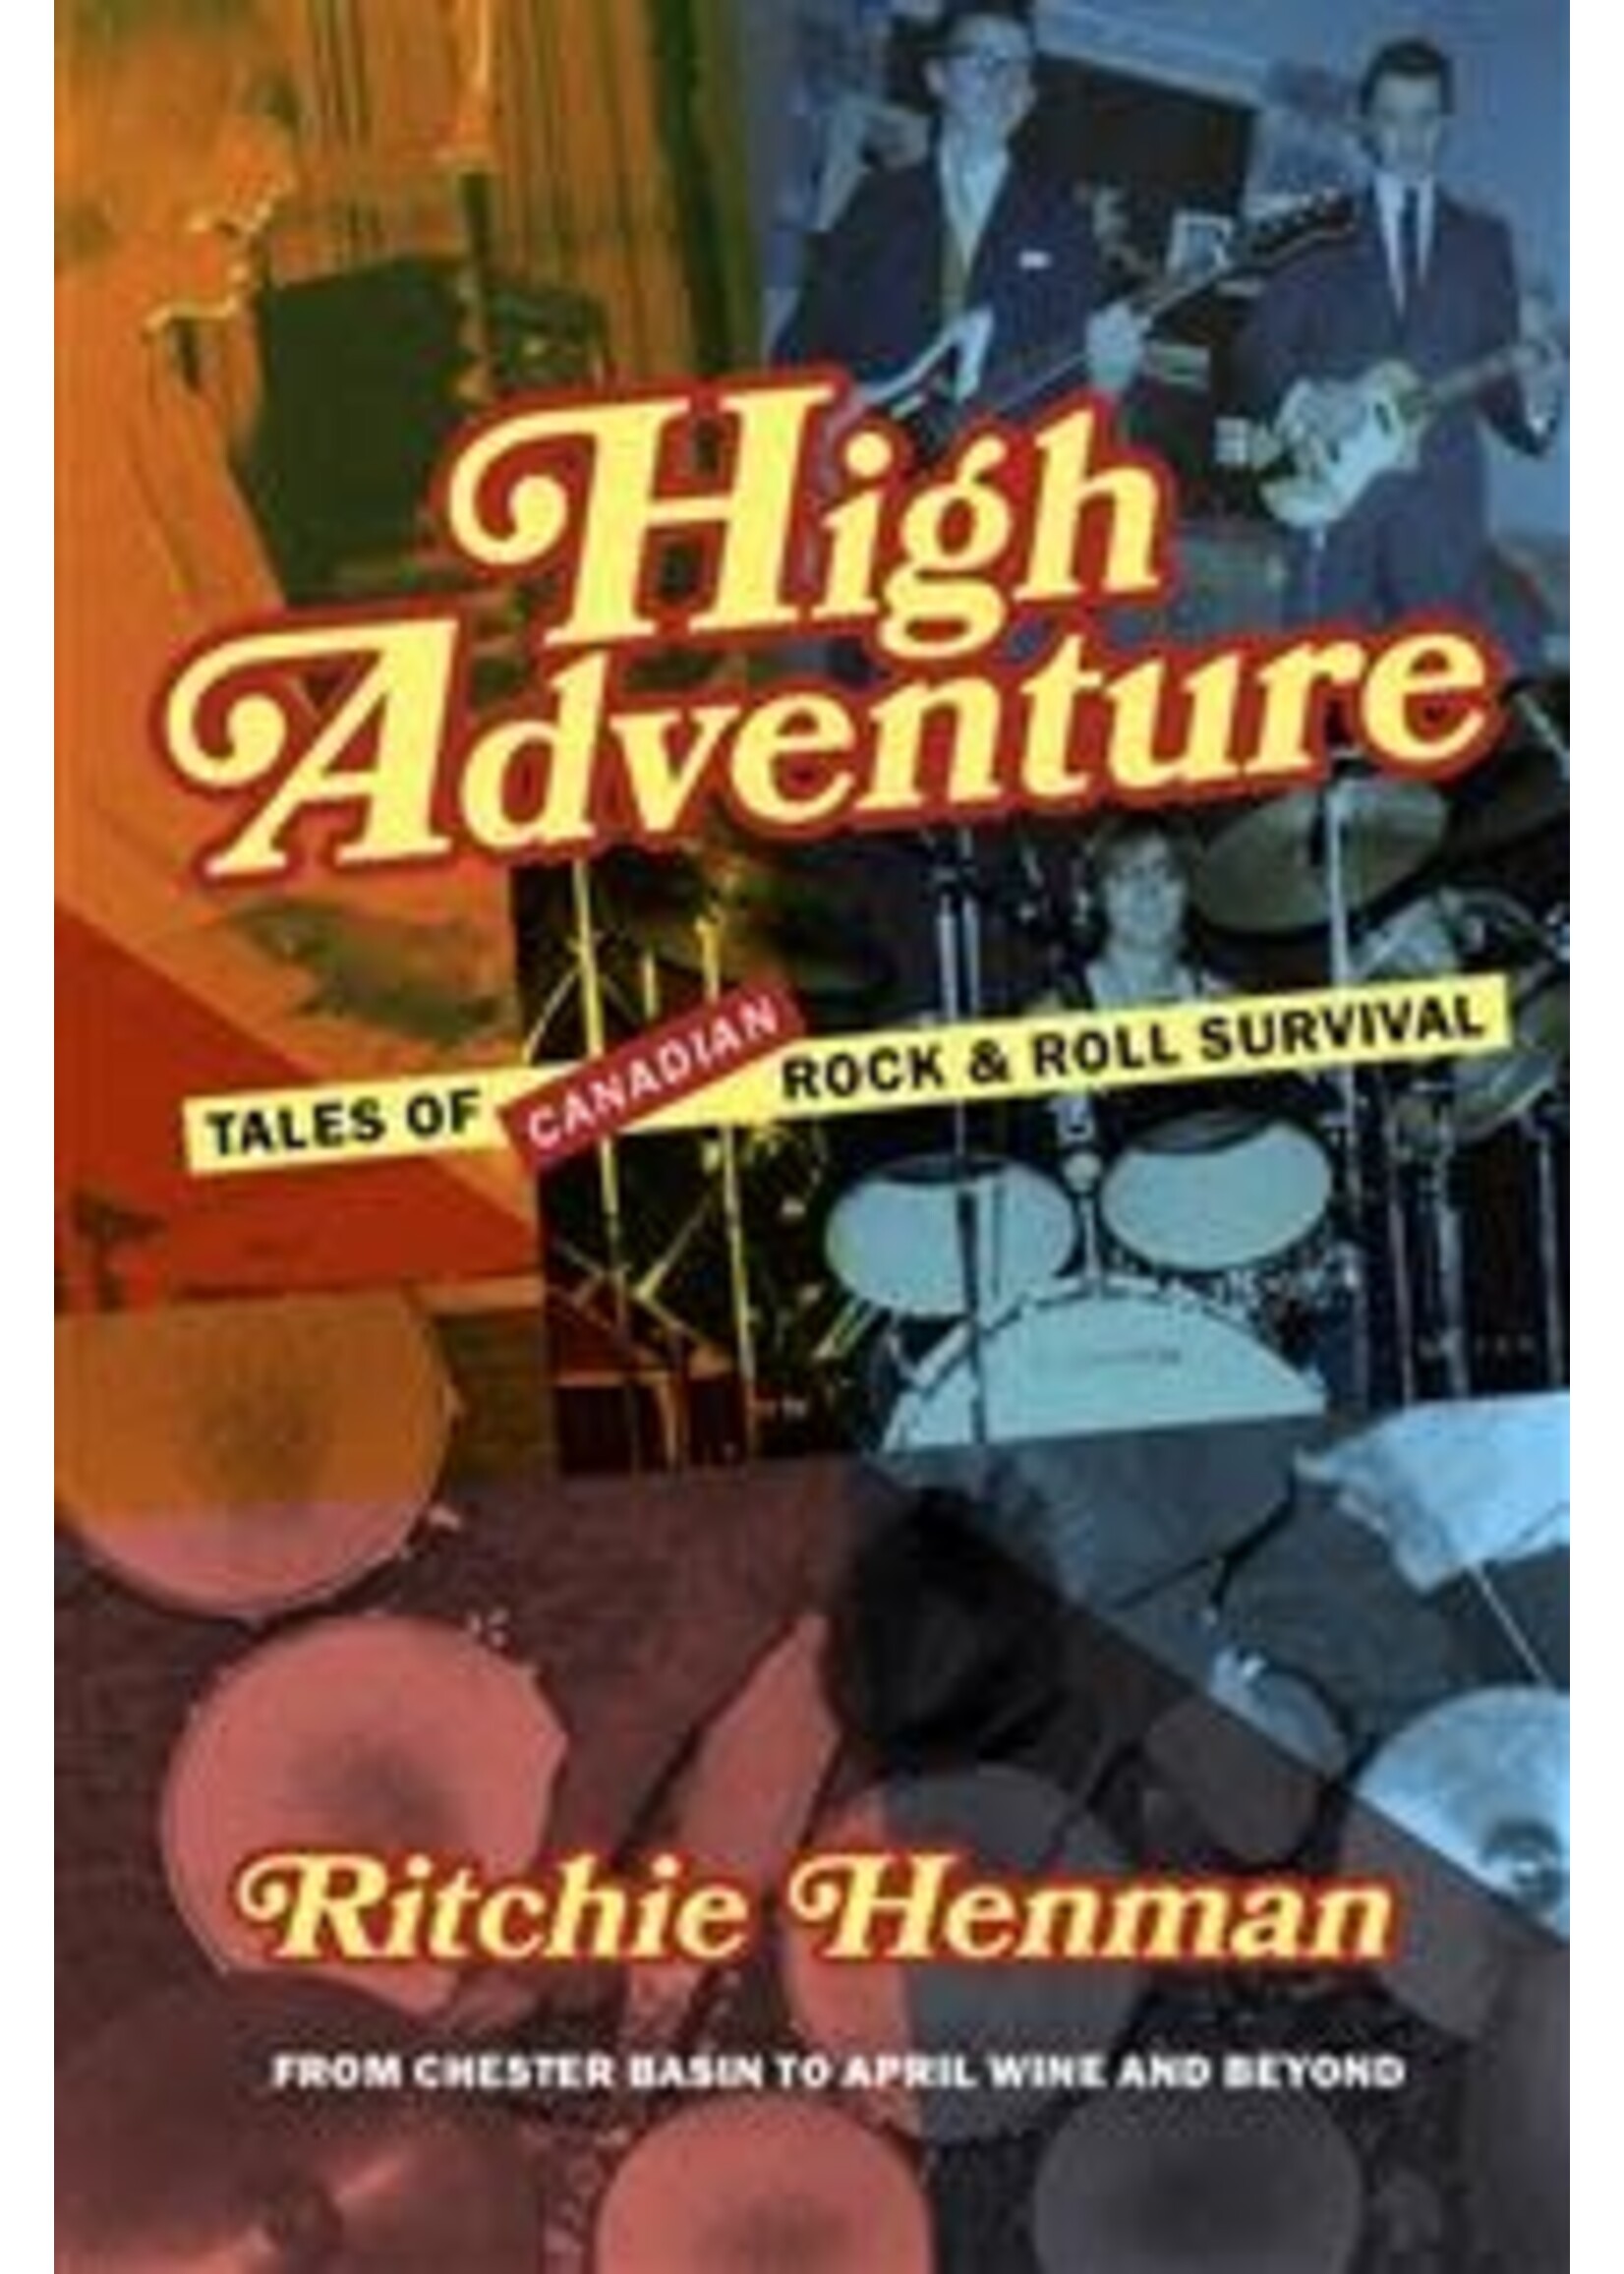 High Adventure: Tales of Canadian Rock & Roll Survival (from Chester Basin to April Wine and Beyond) by Ritchie Henman